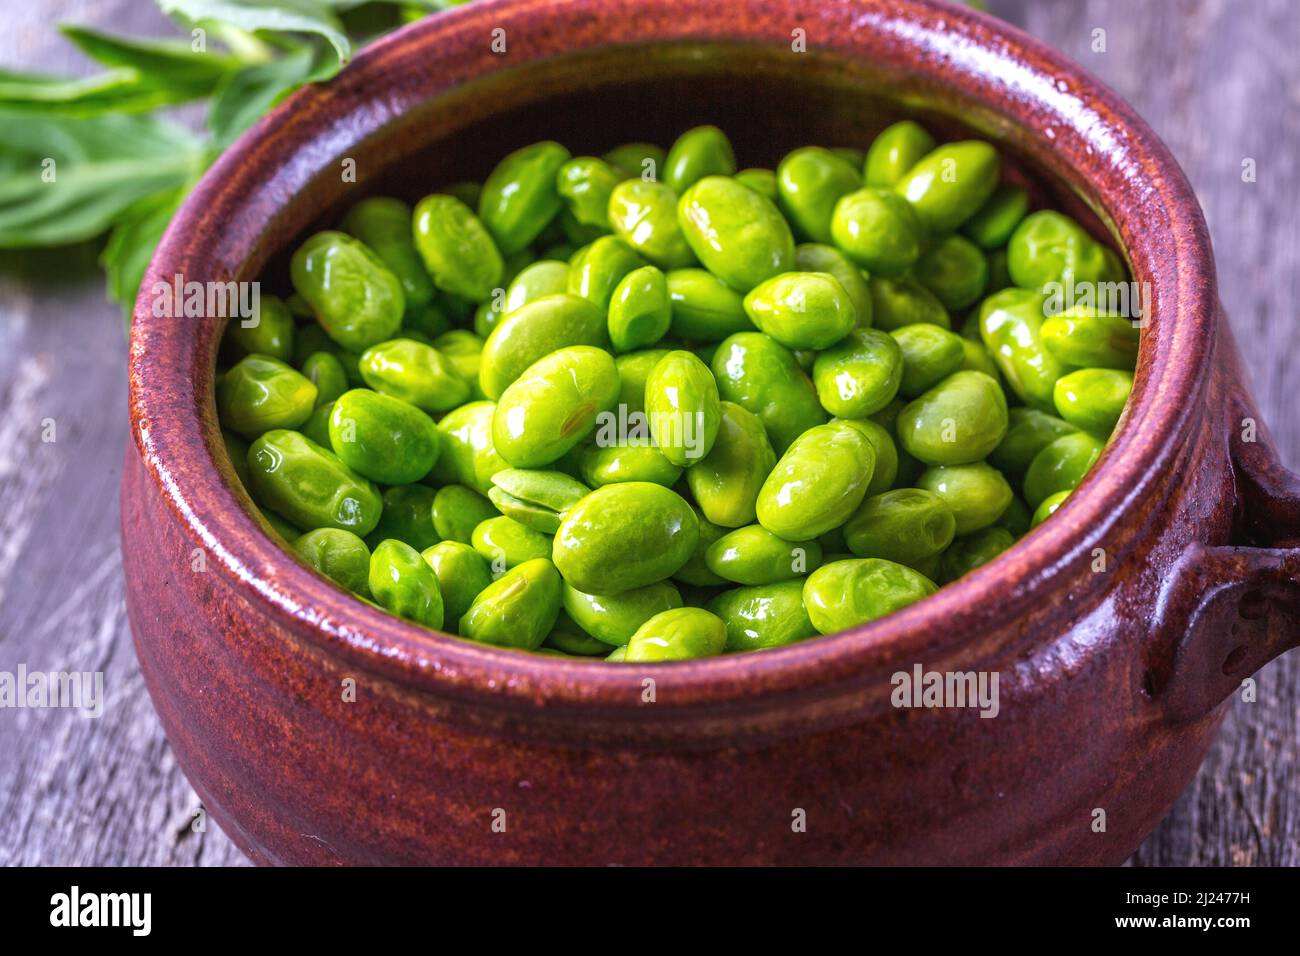 Bowl of Edamame Soybeans on Wooden Background Stock Photo - Alamy